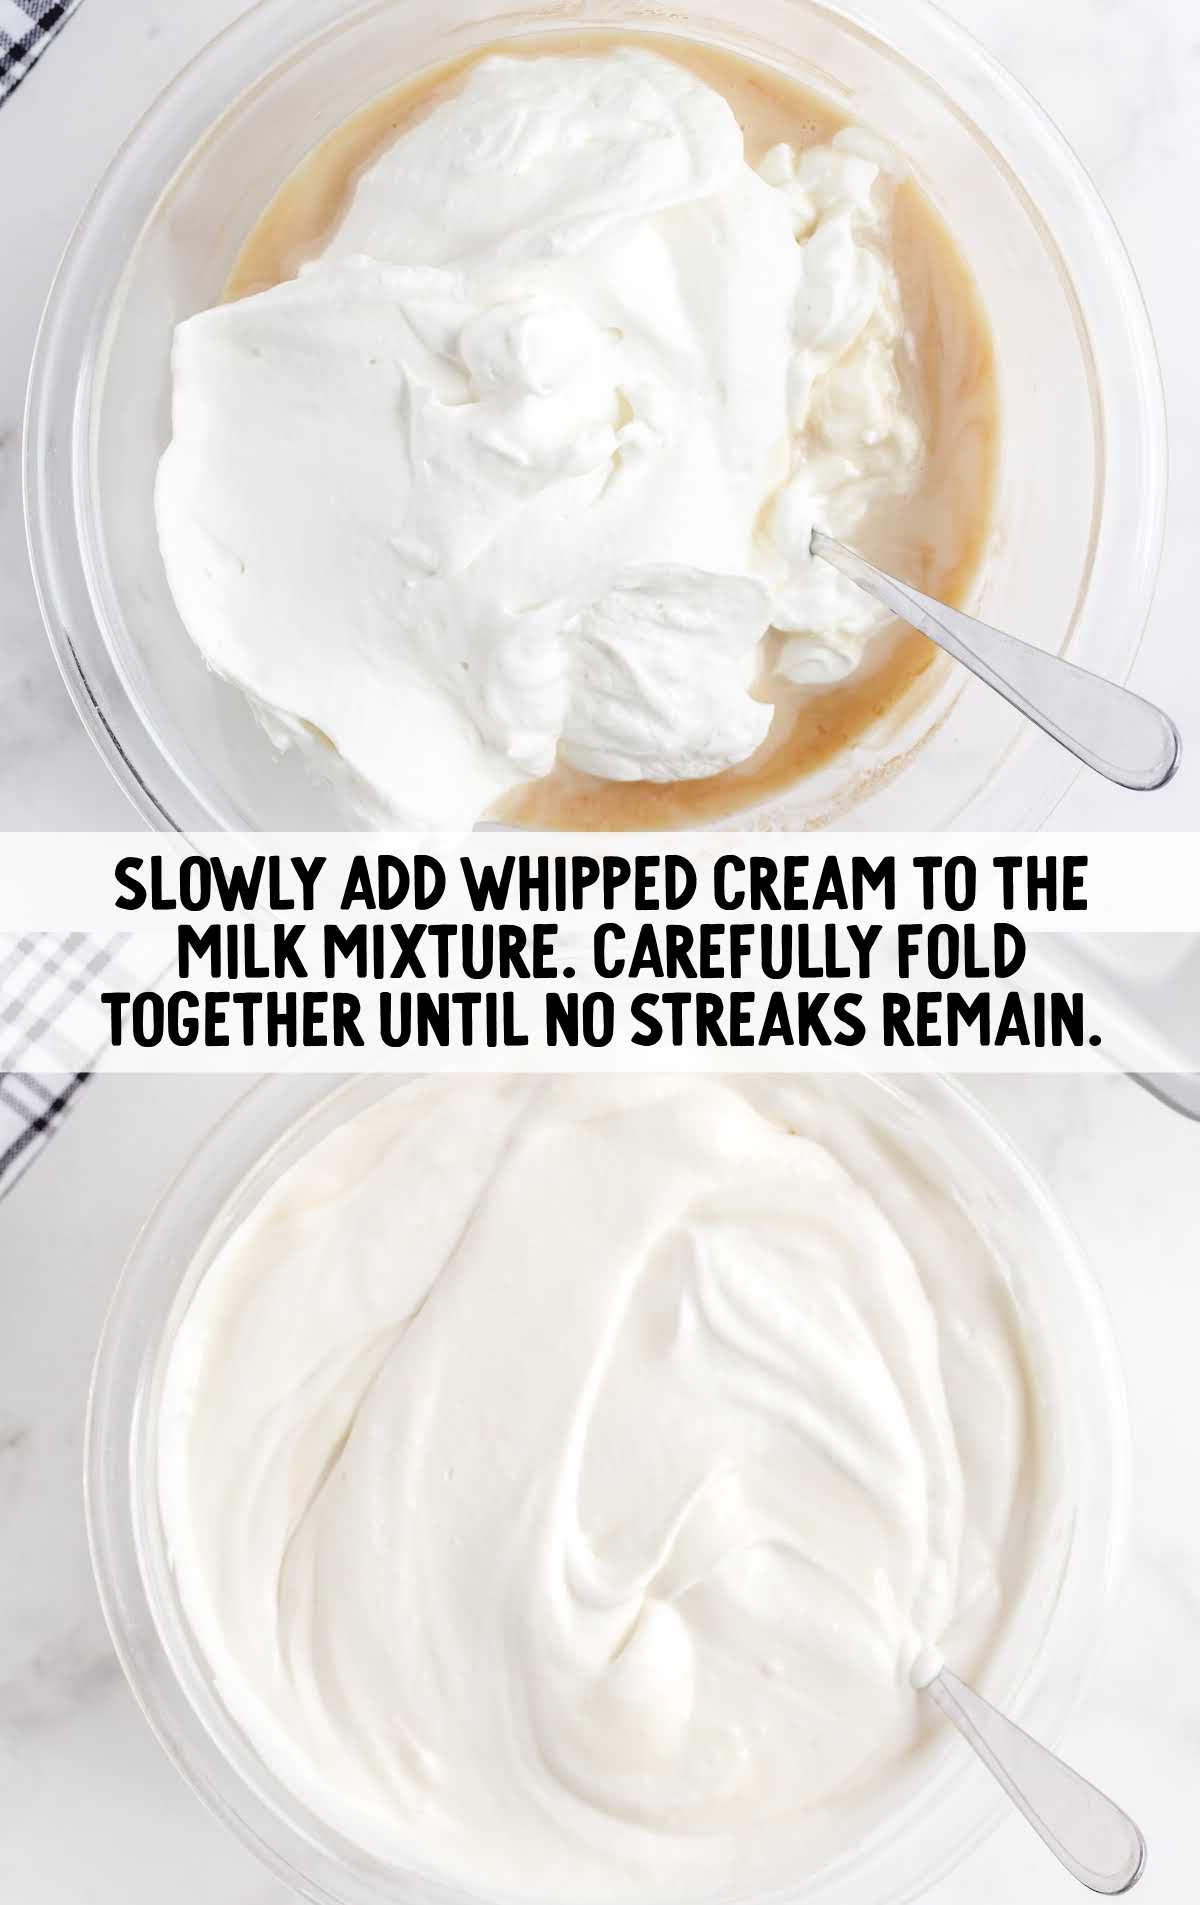 whipped cream being folded into the milk mixture